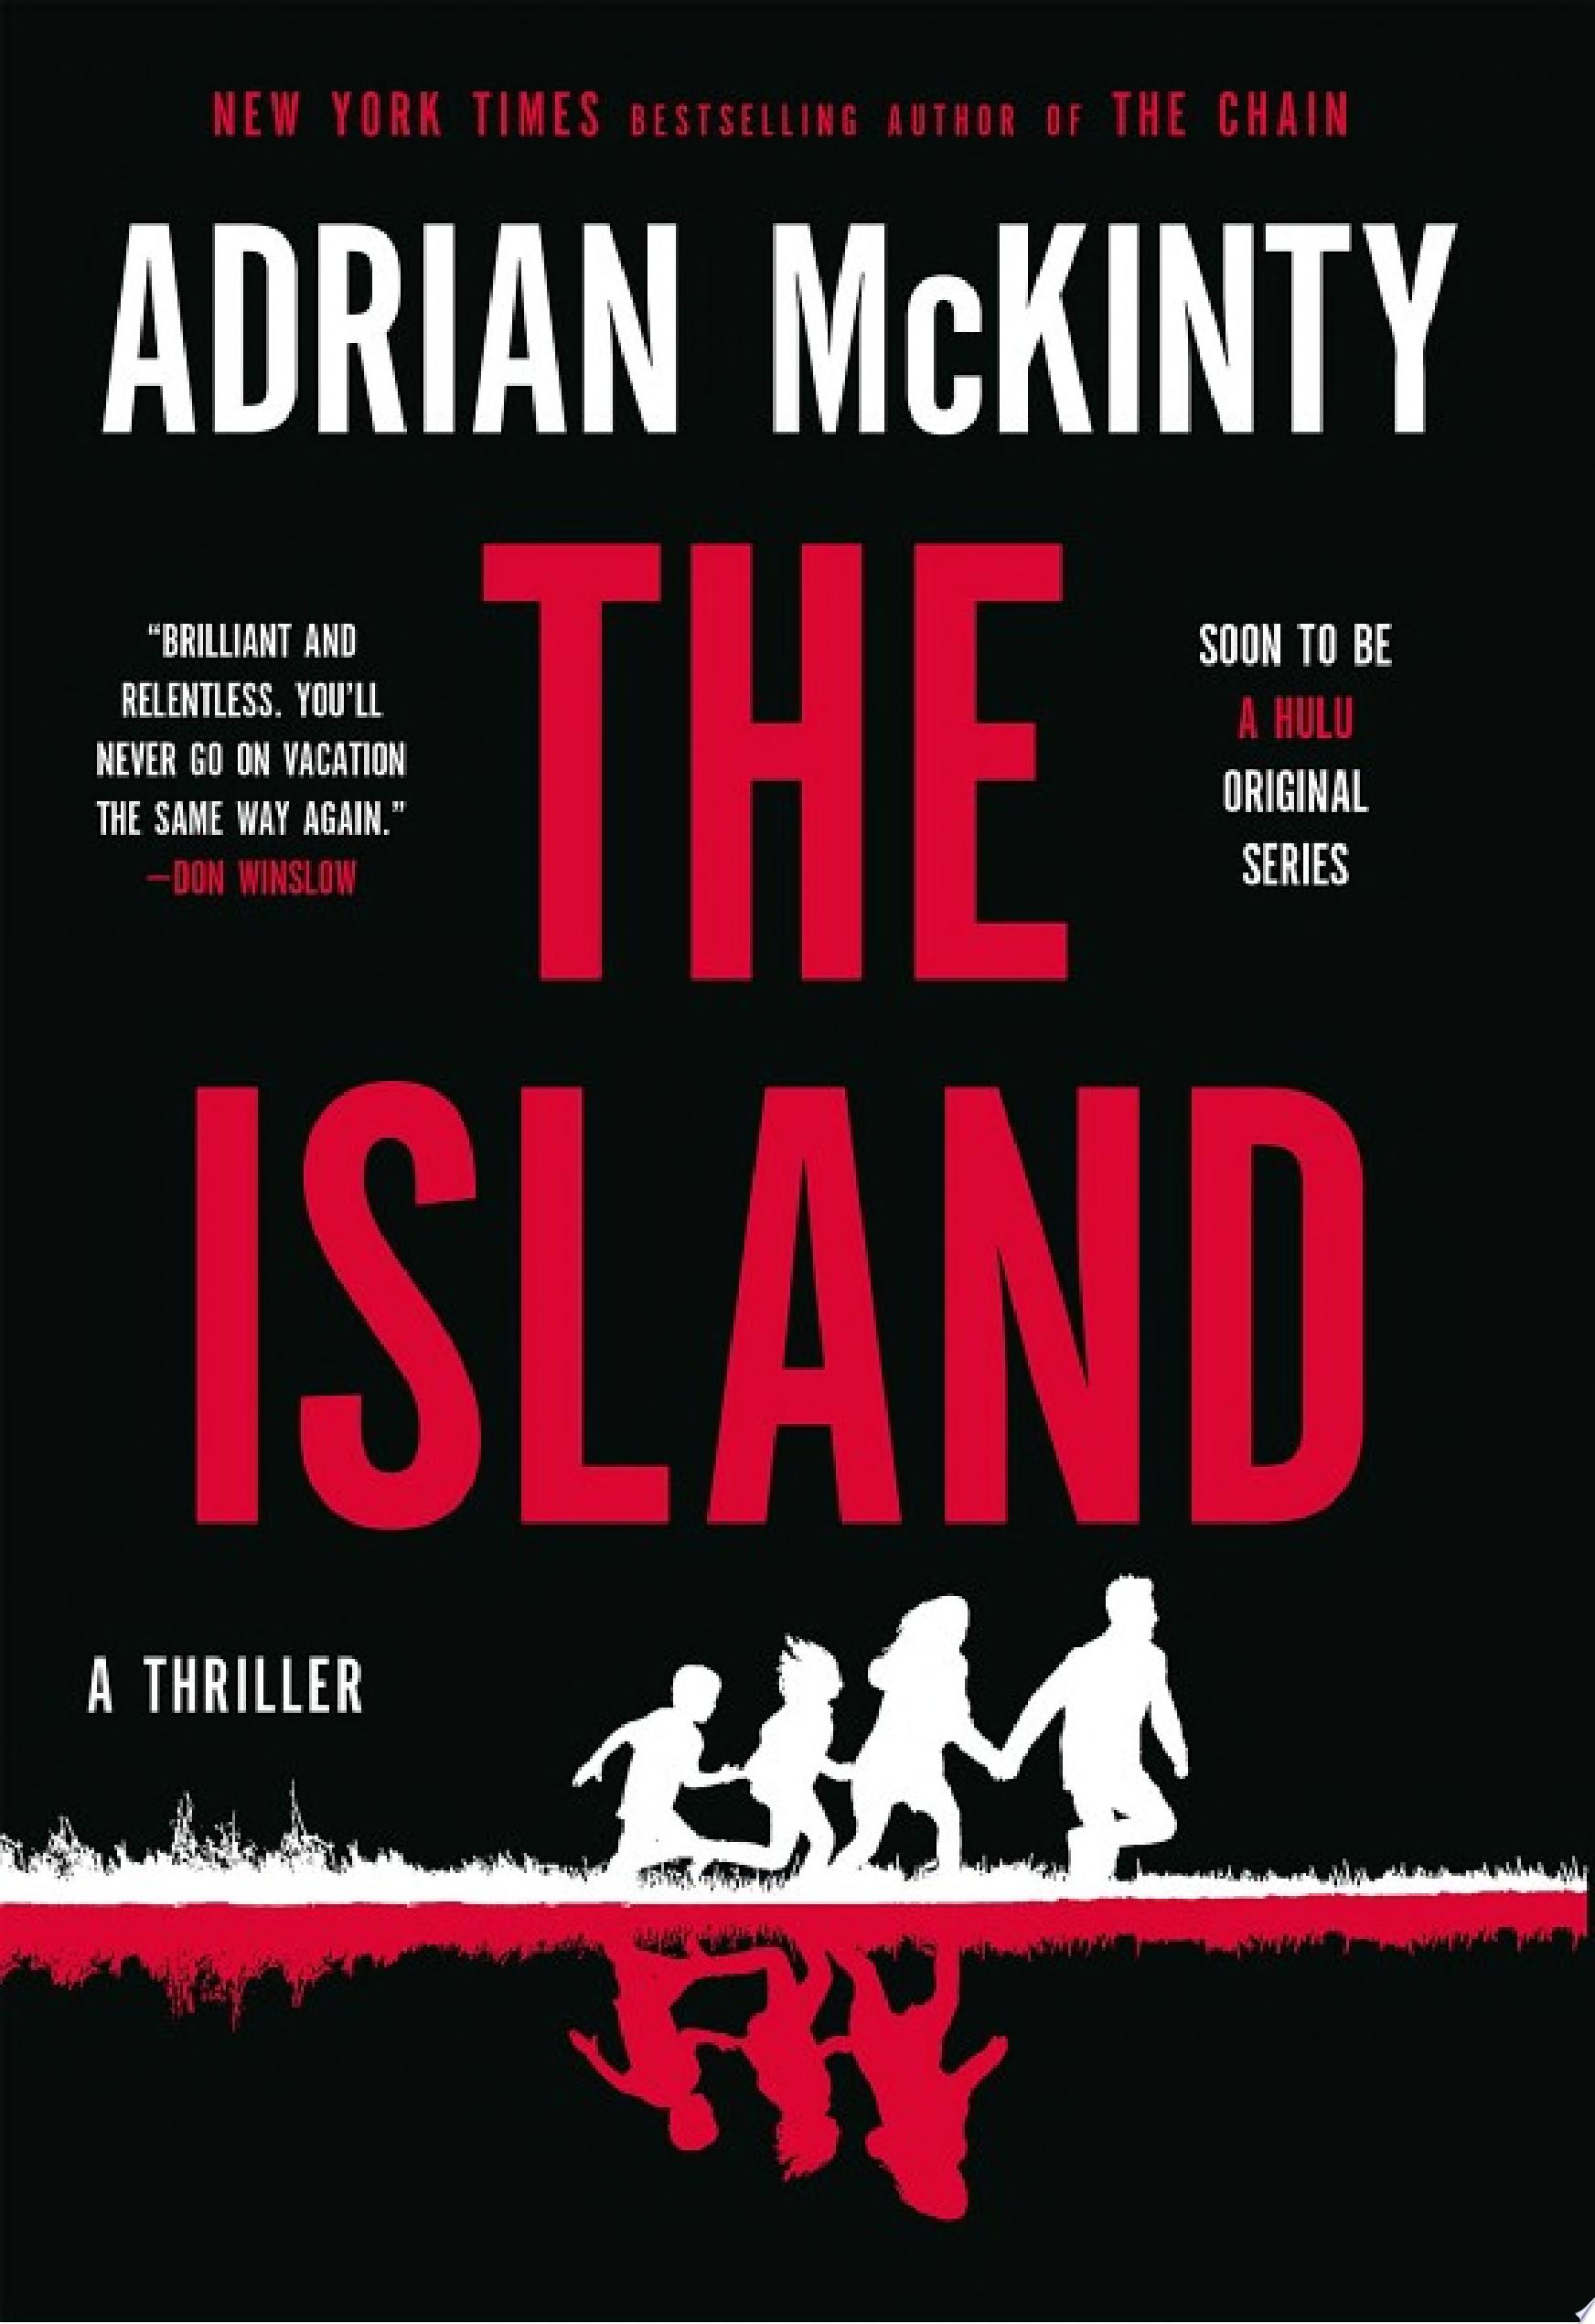 Image for "The Island"